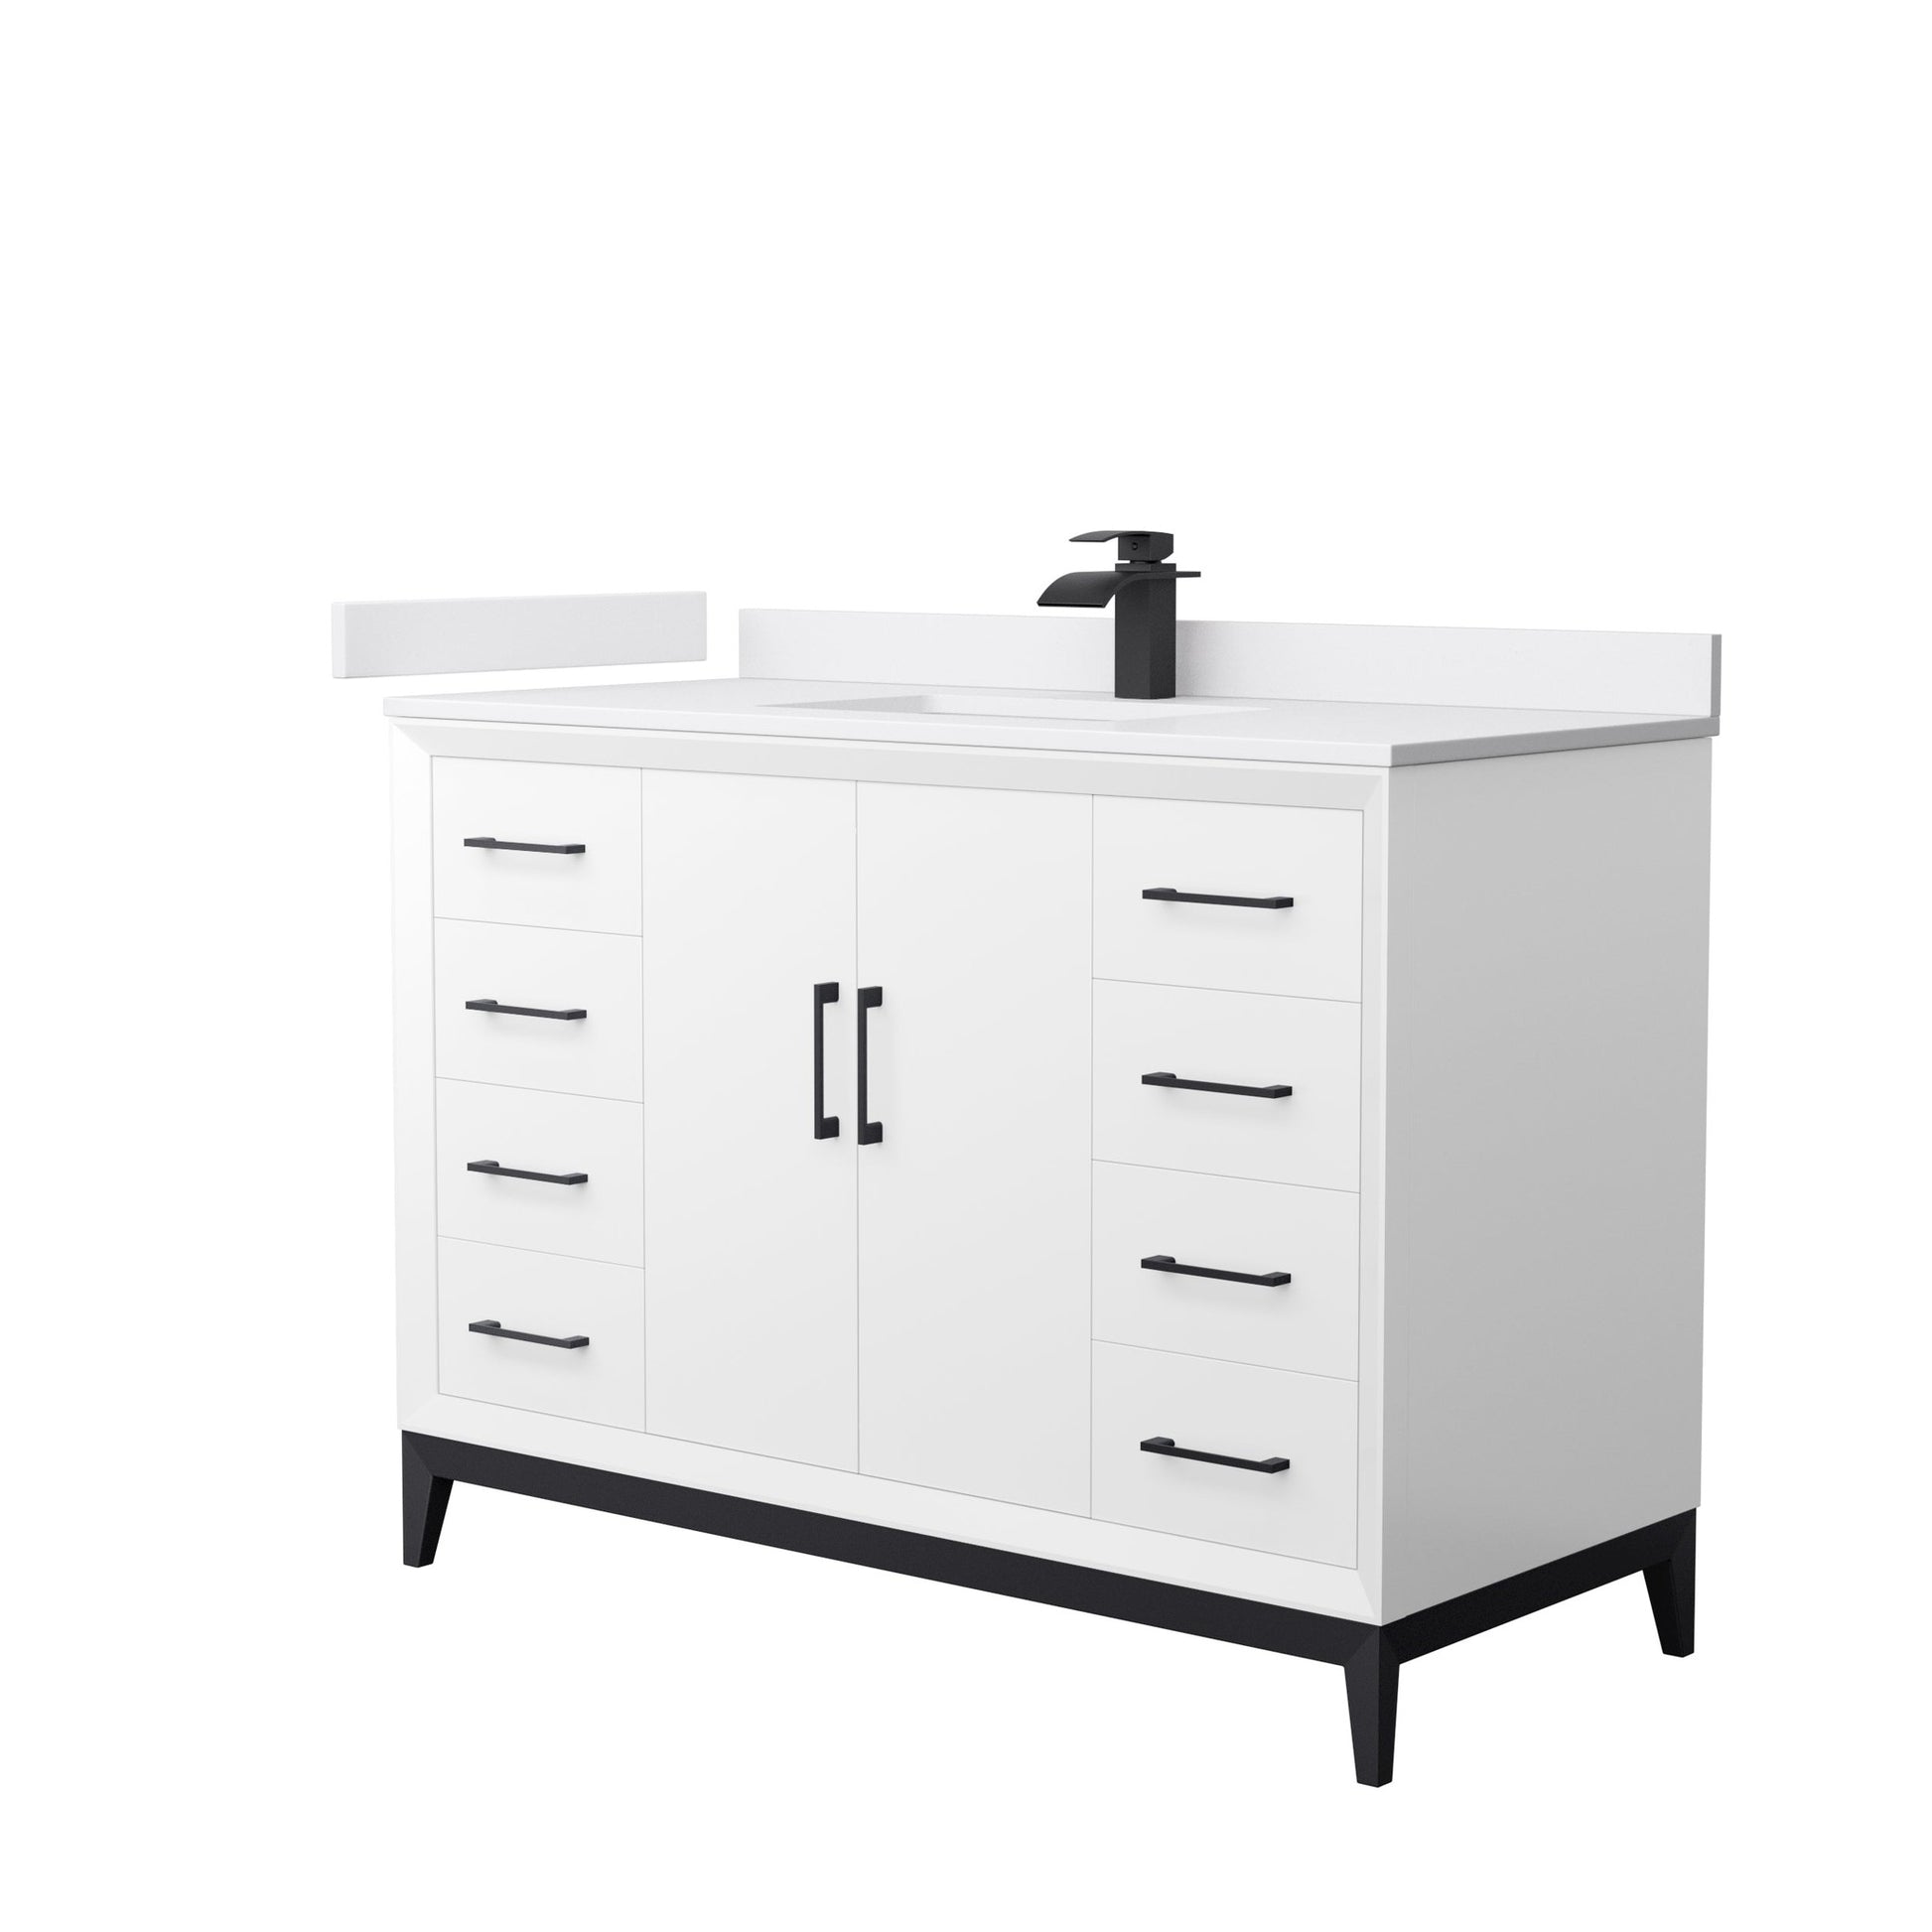 Wyndham Collection Amici 48" Single Bathroom Vanity in White, White Cultured Marble Countertop, Undermount Square Sink, Matte Black Trim